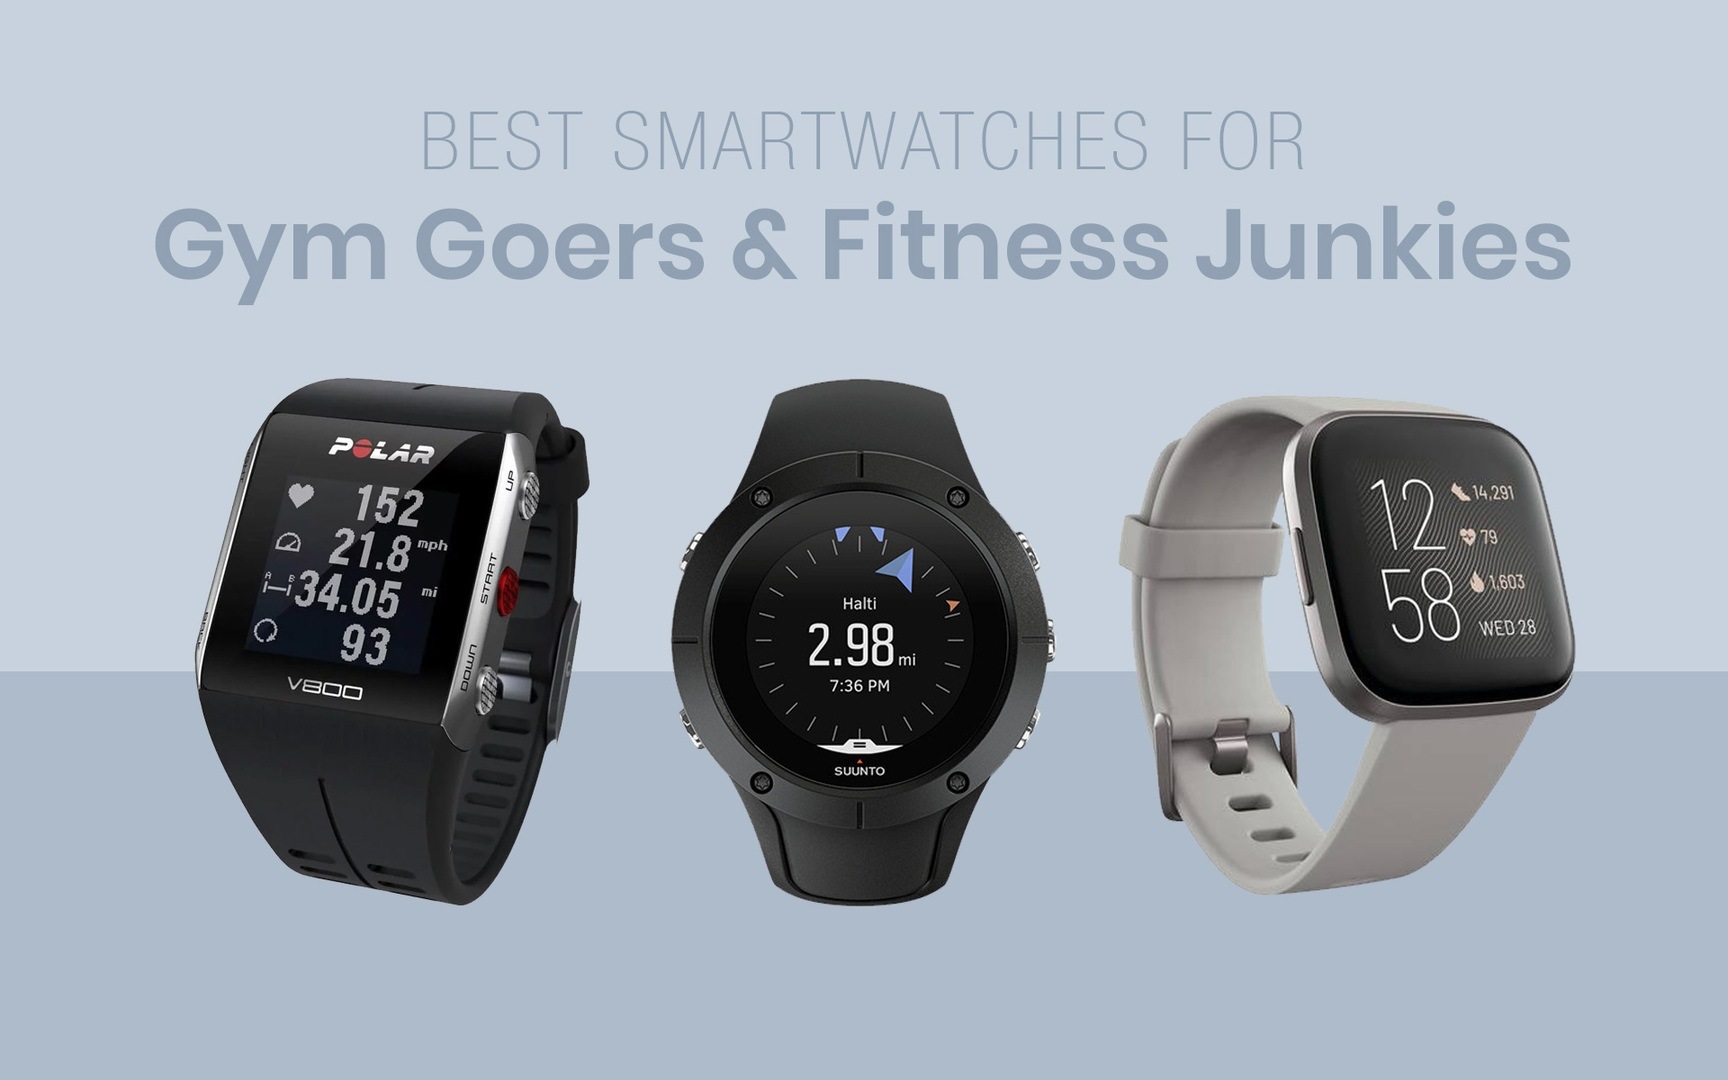 Best Smartwatches For Gym Goers and Fitness Junkies